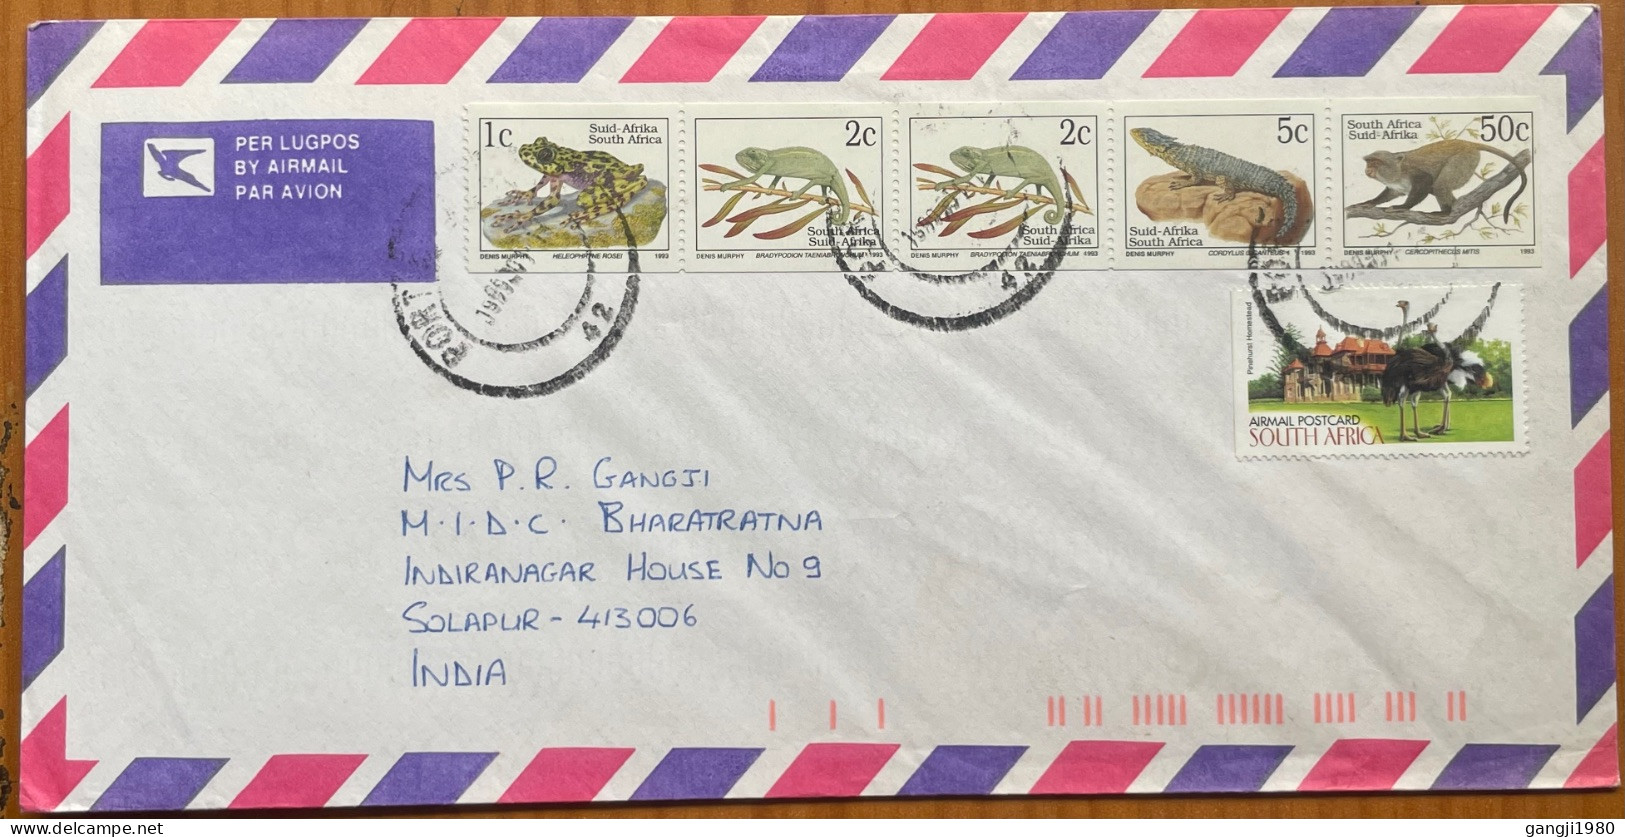 SOUTH AFRICA 1993, COVER USED TO INDIA, BOOKLET PANE, REPTILE, MONKEY, ANIMAL, BIRD, BUILDING, 6 STAMP, PORT ELIZABETH - Brieven En Documenten